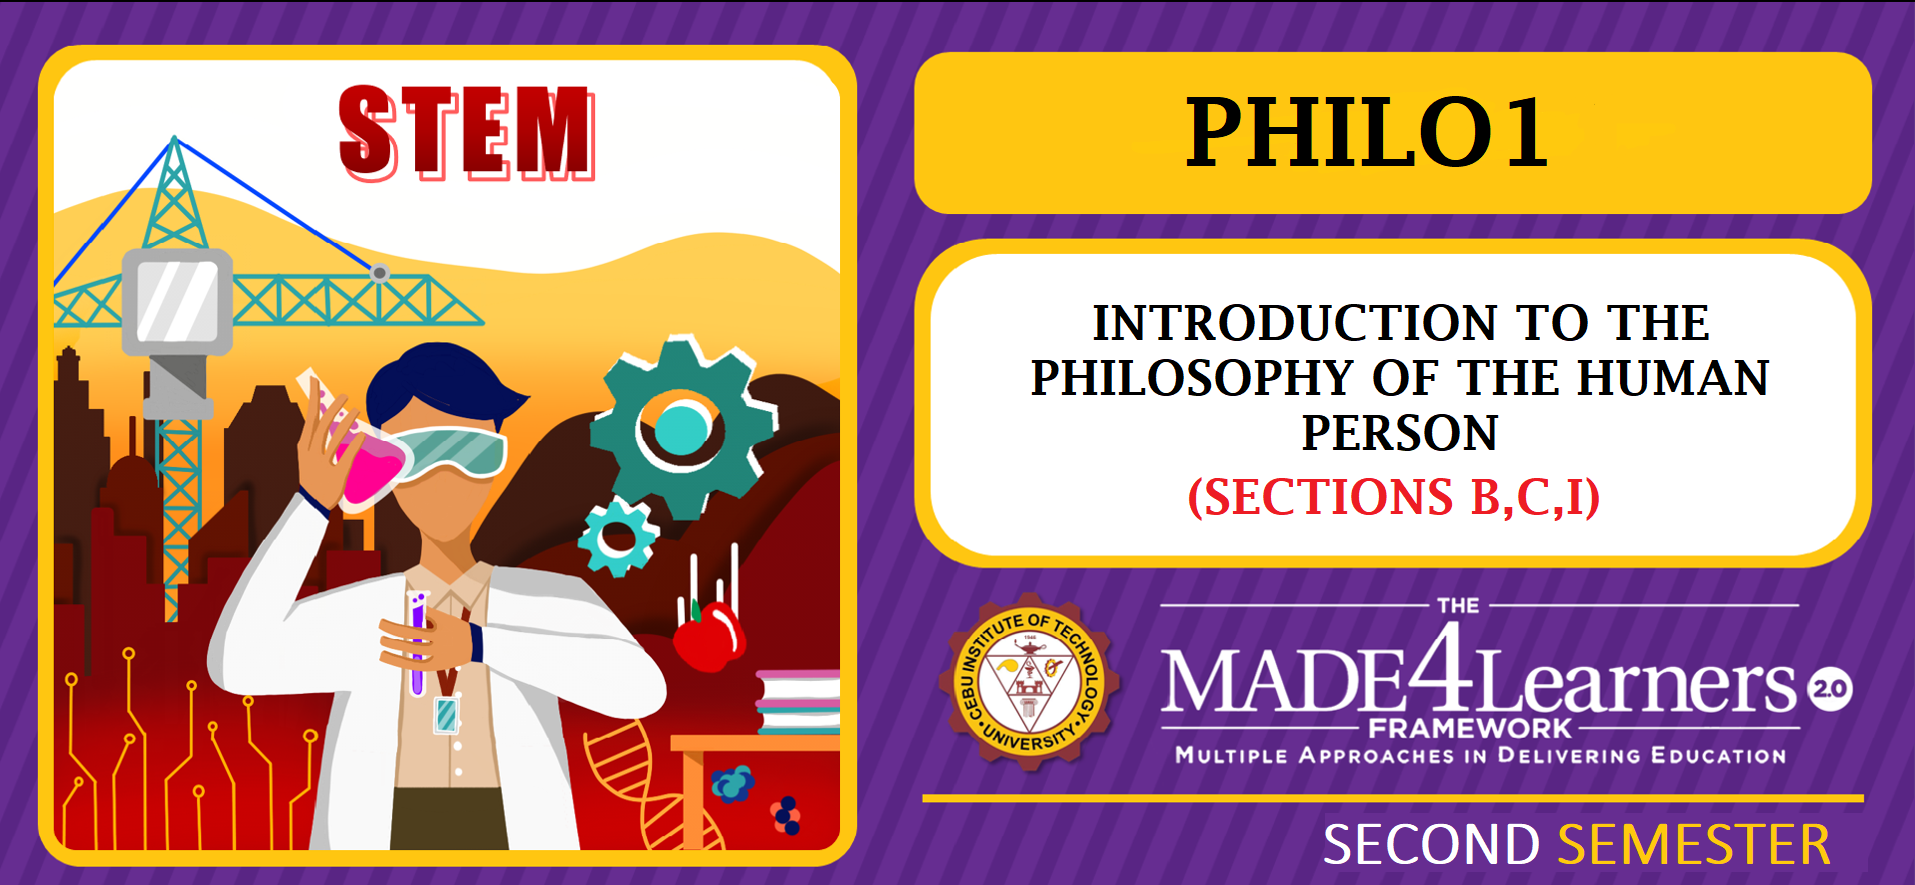 PHILO1: Introduction to the Philosophy of the Human Person (Alesna)